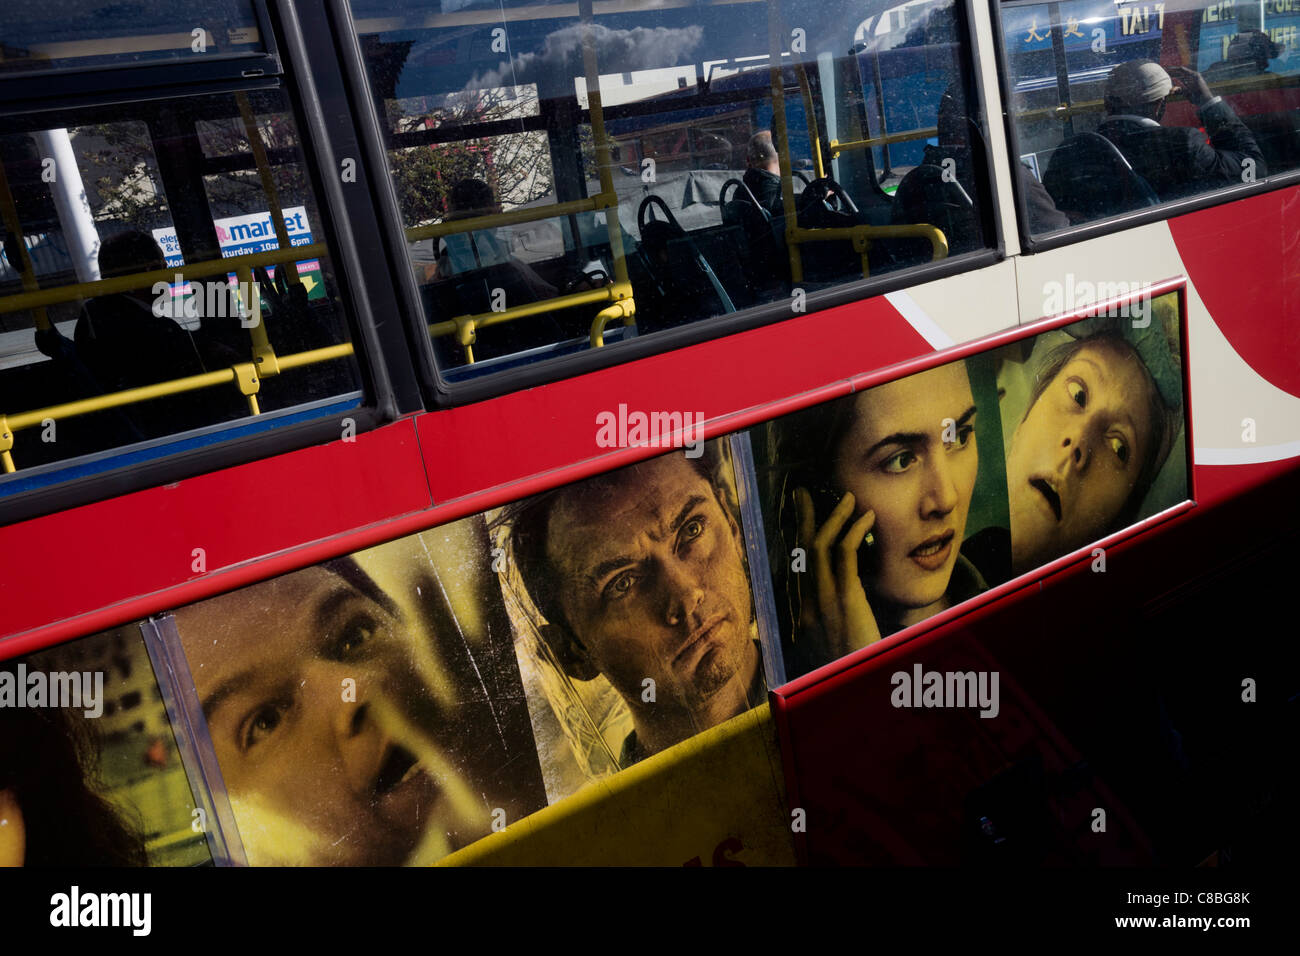 Faces of actors from the film Contagion adorn the upper deck of a red London double-decker bus. Stock Photo